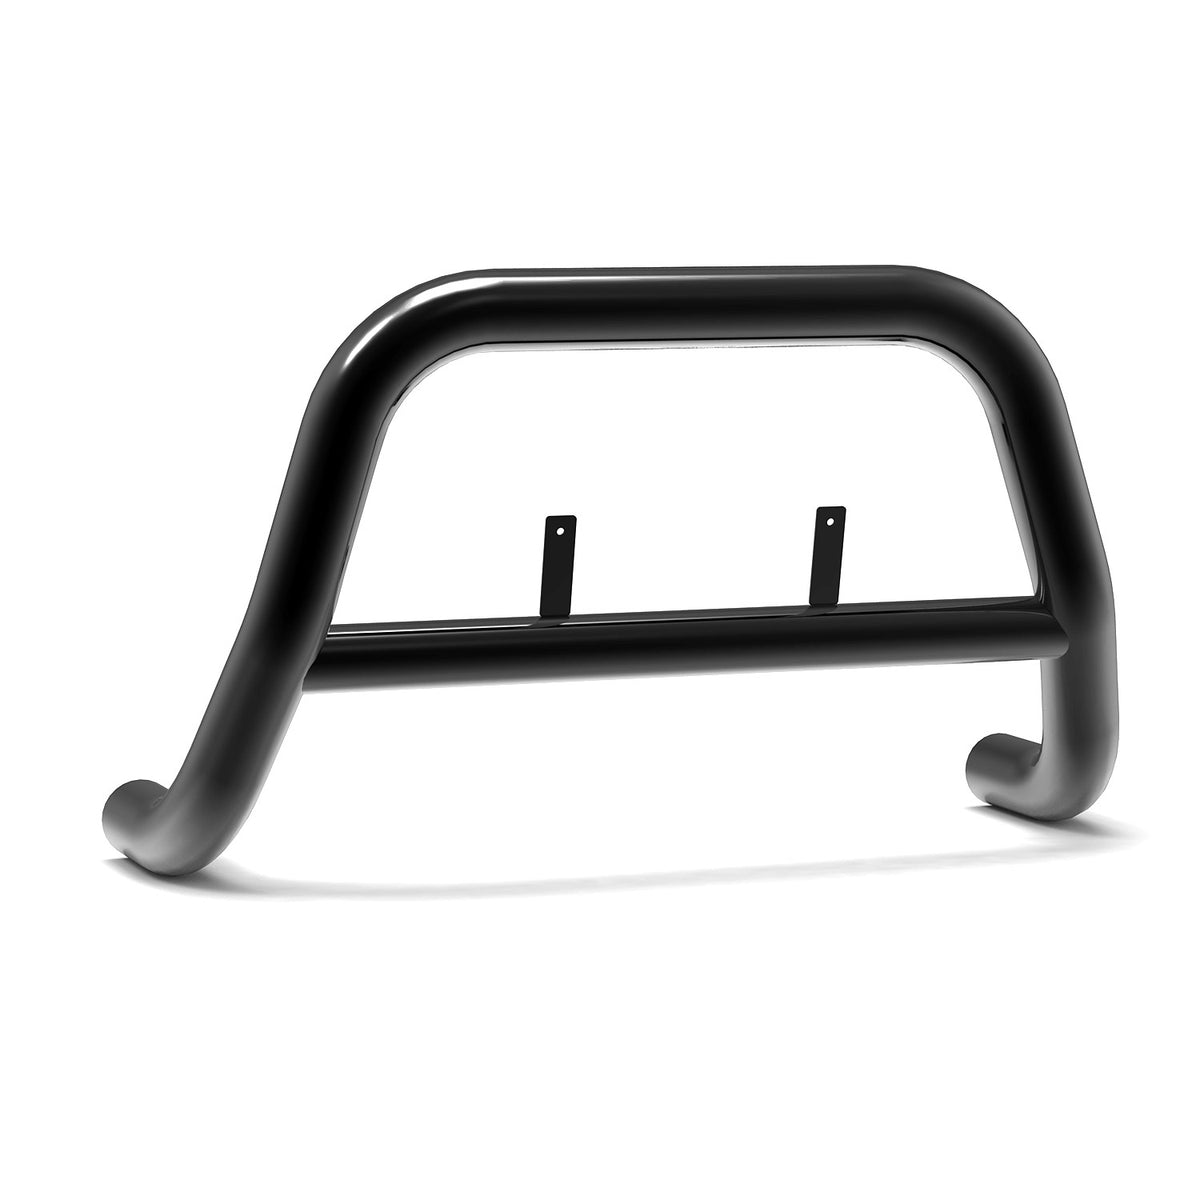 Front guard front protection bar for VW T5 2003-2015 ø76mm EC type approval black